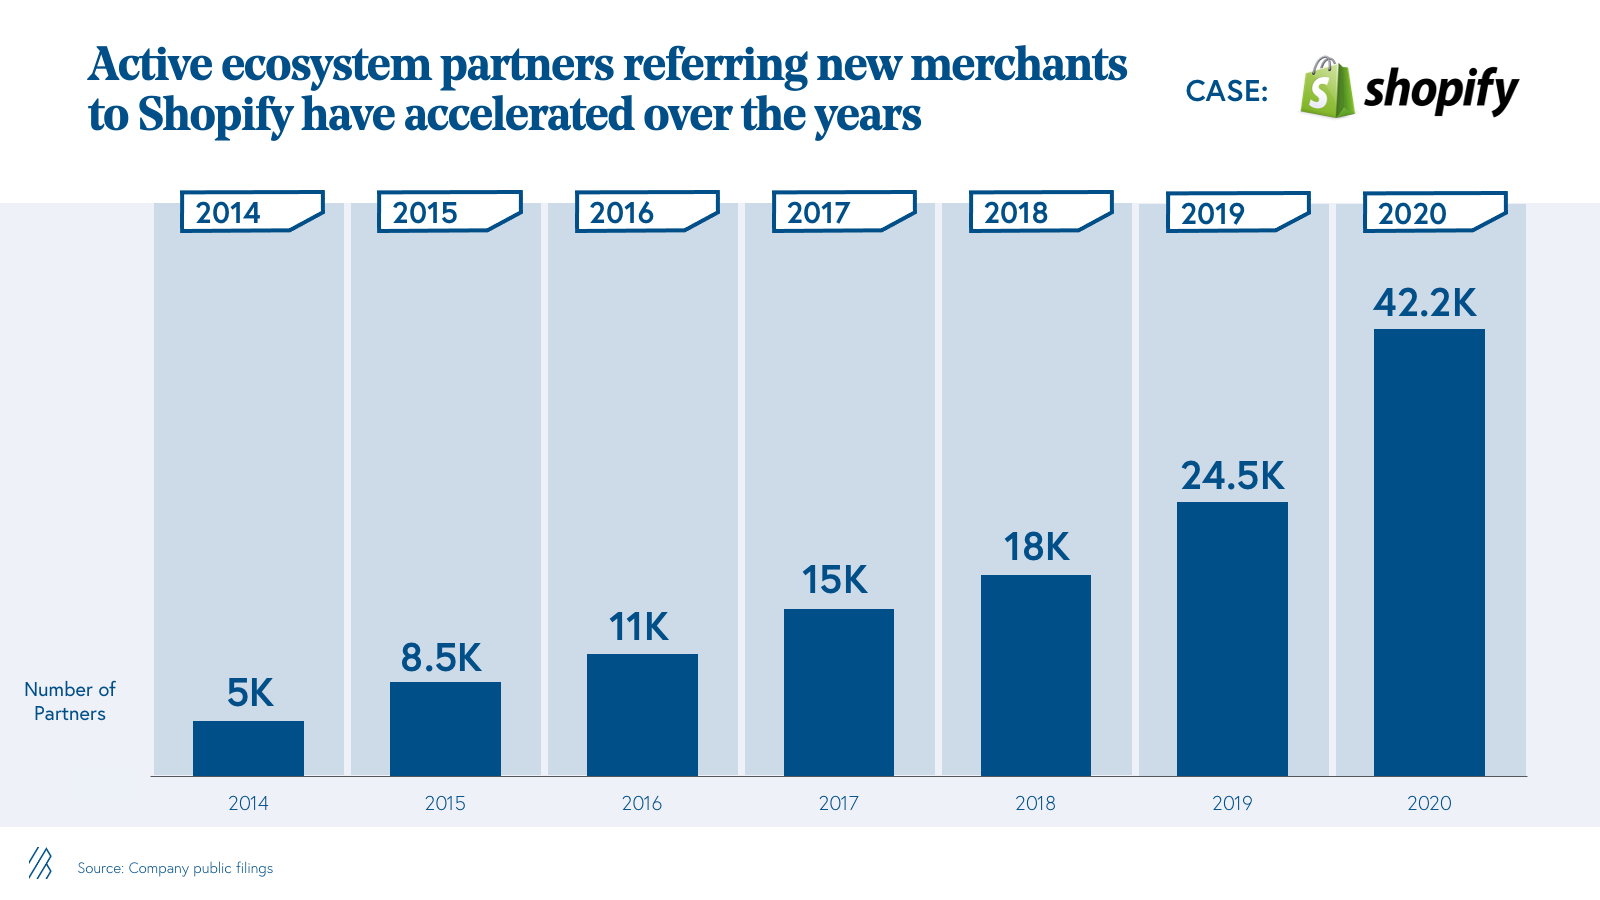 Active ecosystem partners referring new merchants to Shopify have accelerated 